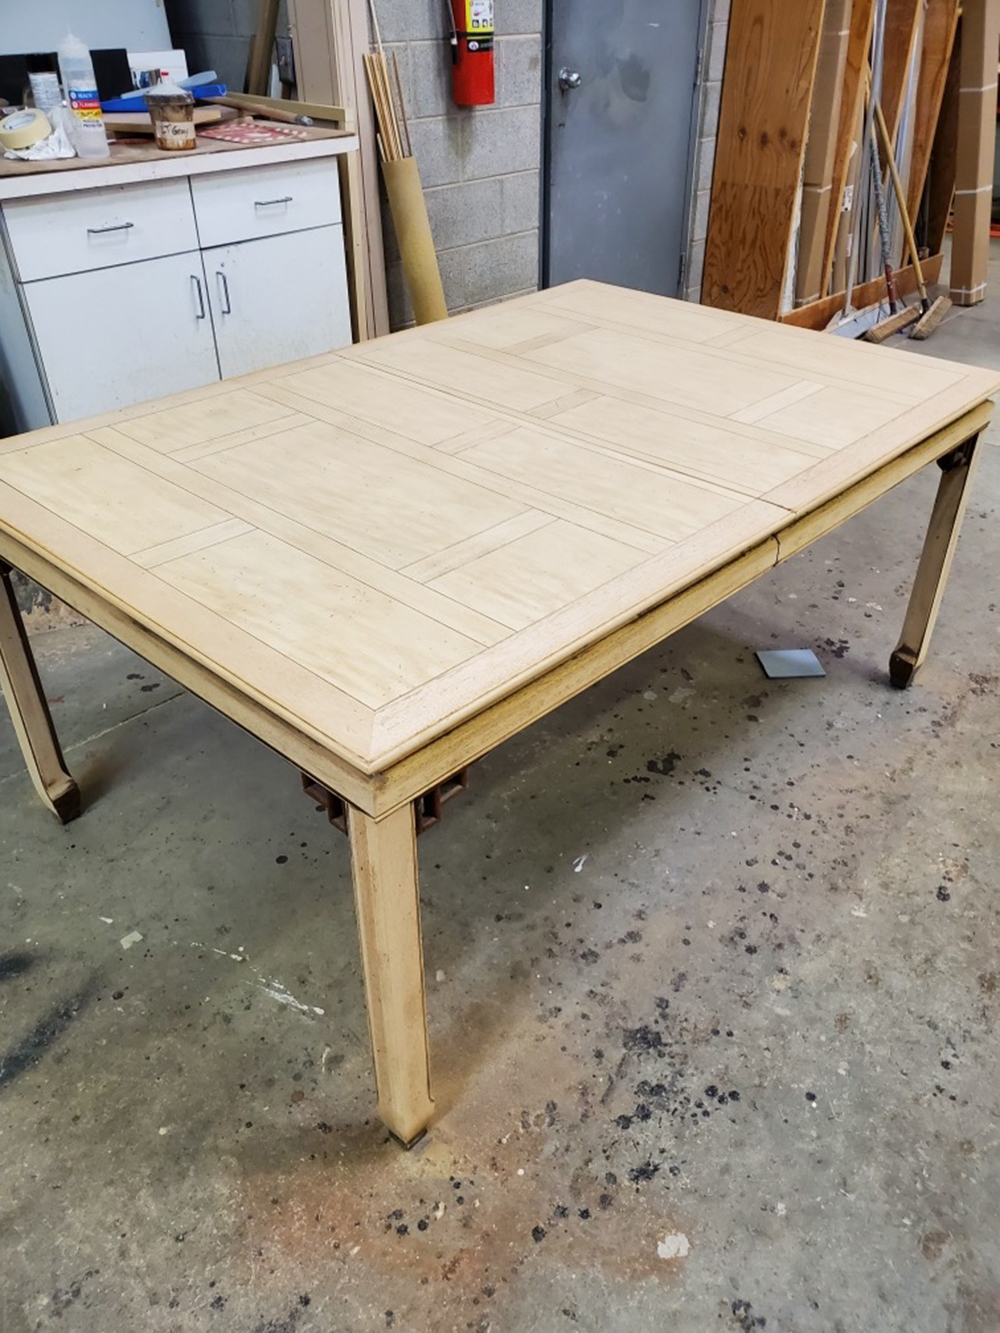 Vintage Table After Sanding - Room For Tuesday